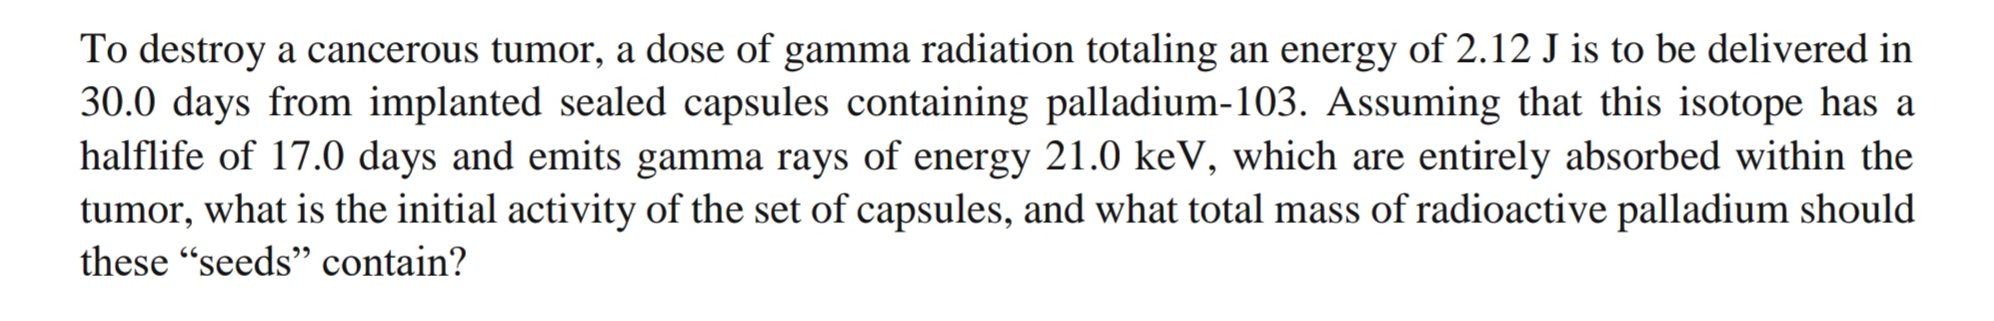 To destroy a cancerous tumor, a dose of gamma radiation totaling an energy of 2.12 J is to be delivered in
30.0 days from implanted sealed capsules containing palladium-103. Assuming that this isotope has a
halflife of 17.0 days and emits gamma rays of energy 21.0 keV, which are entirely absorbed within the
tumor, what is the initial activity of the set of capsules, and what total mass of radioactive palladium should
these "seeds" contain?
